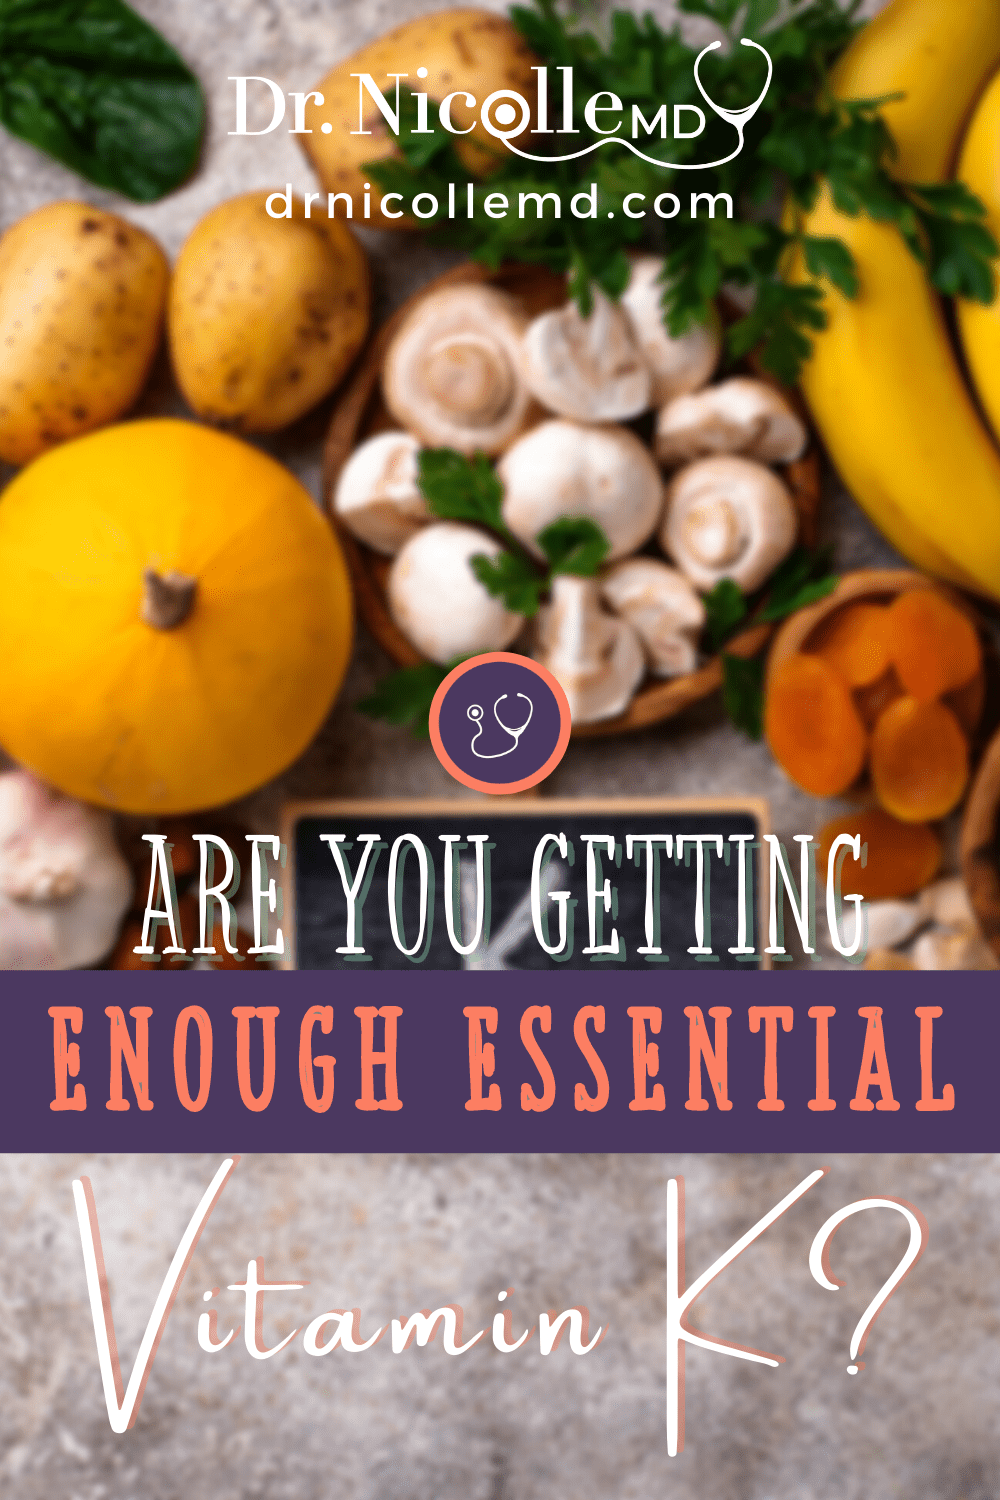 Are You Getting Enough Essential Vitamin K?